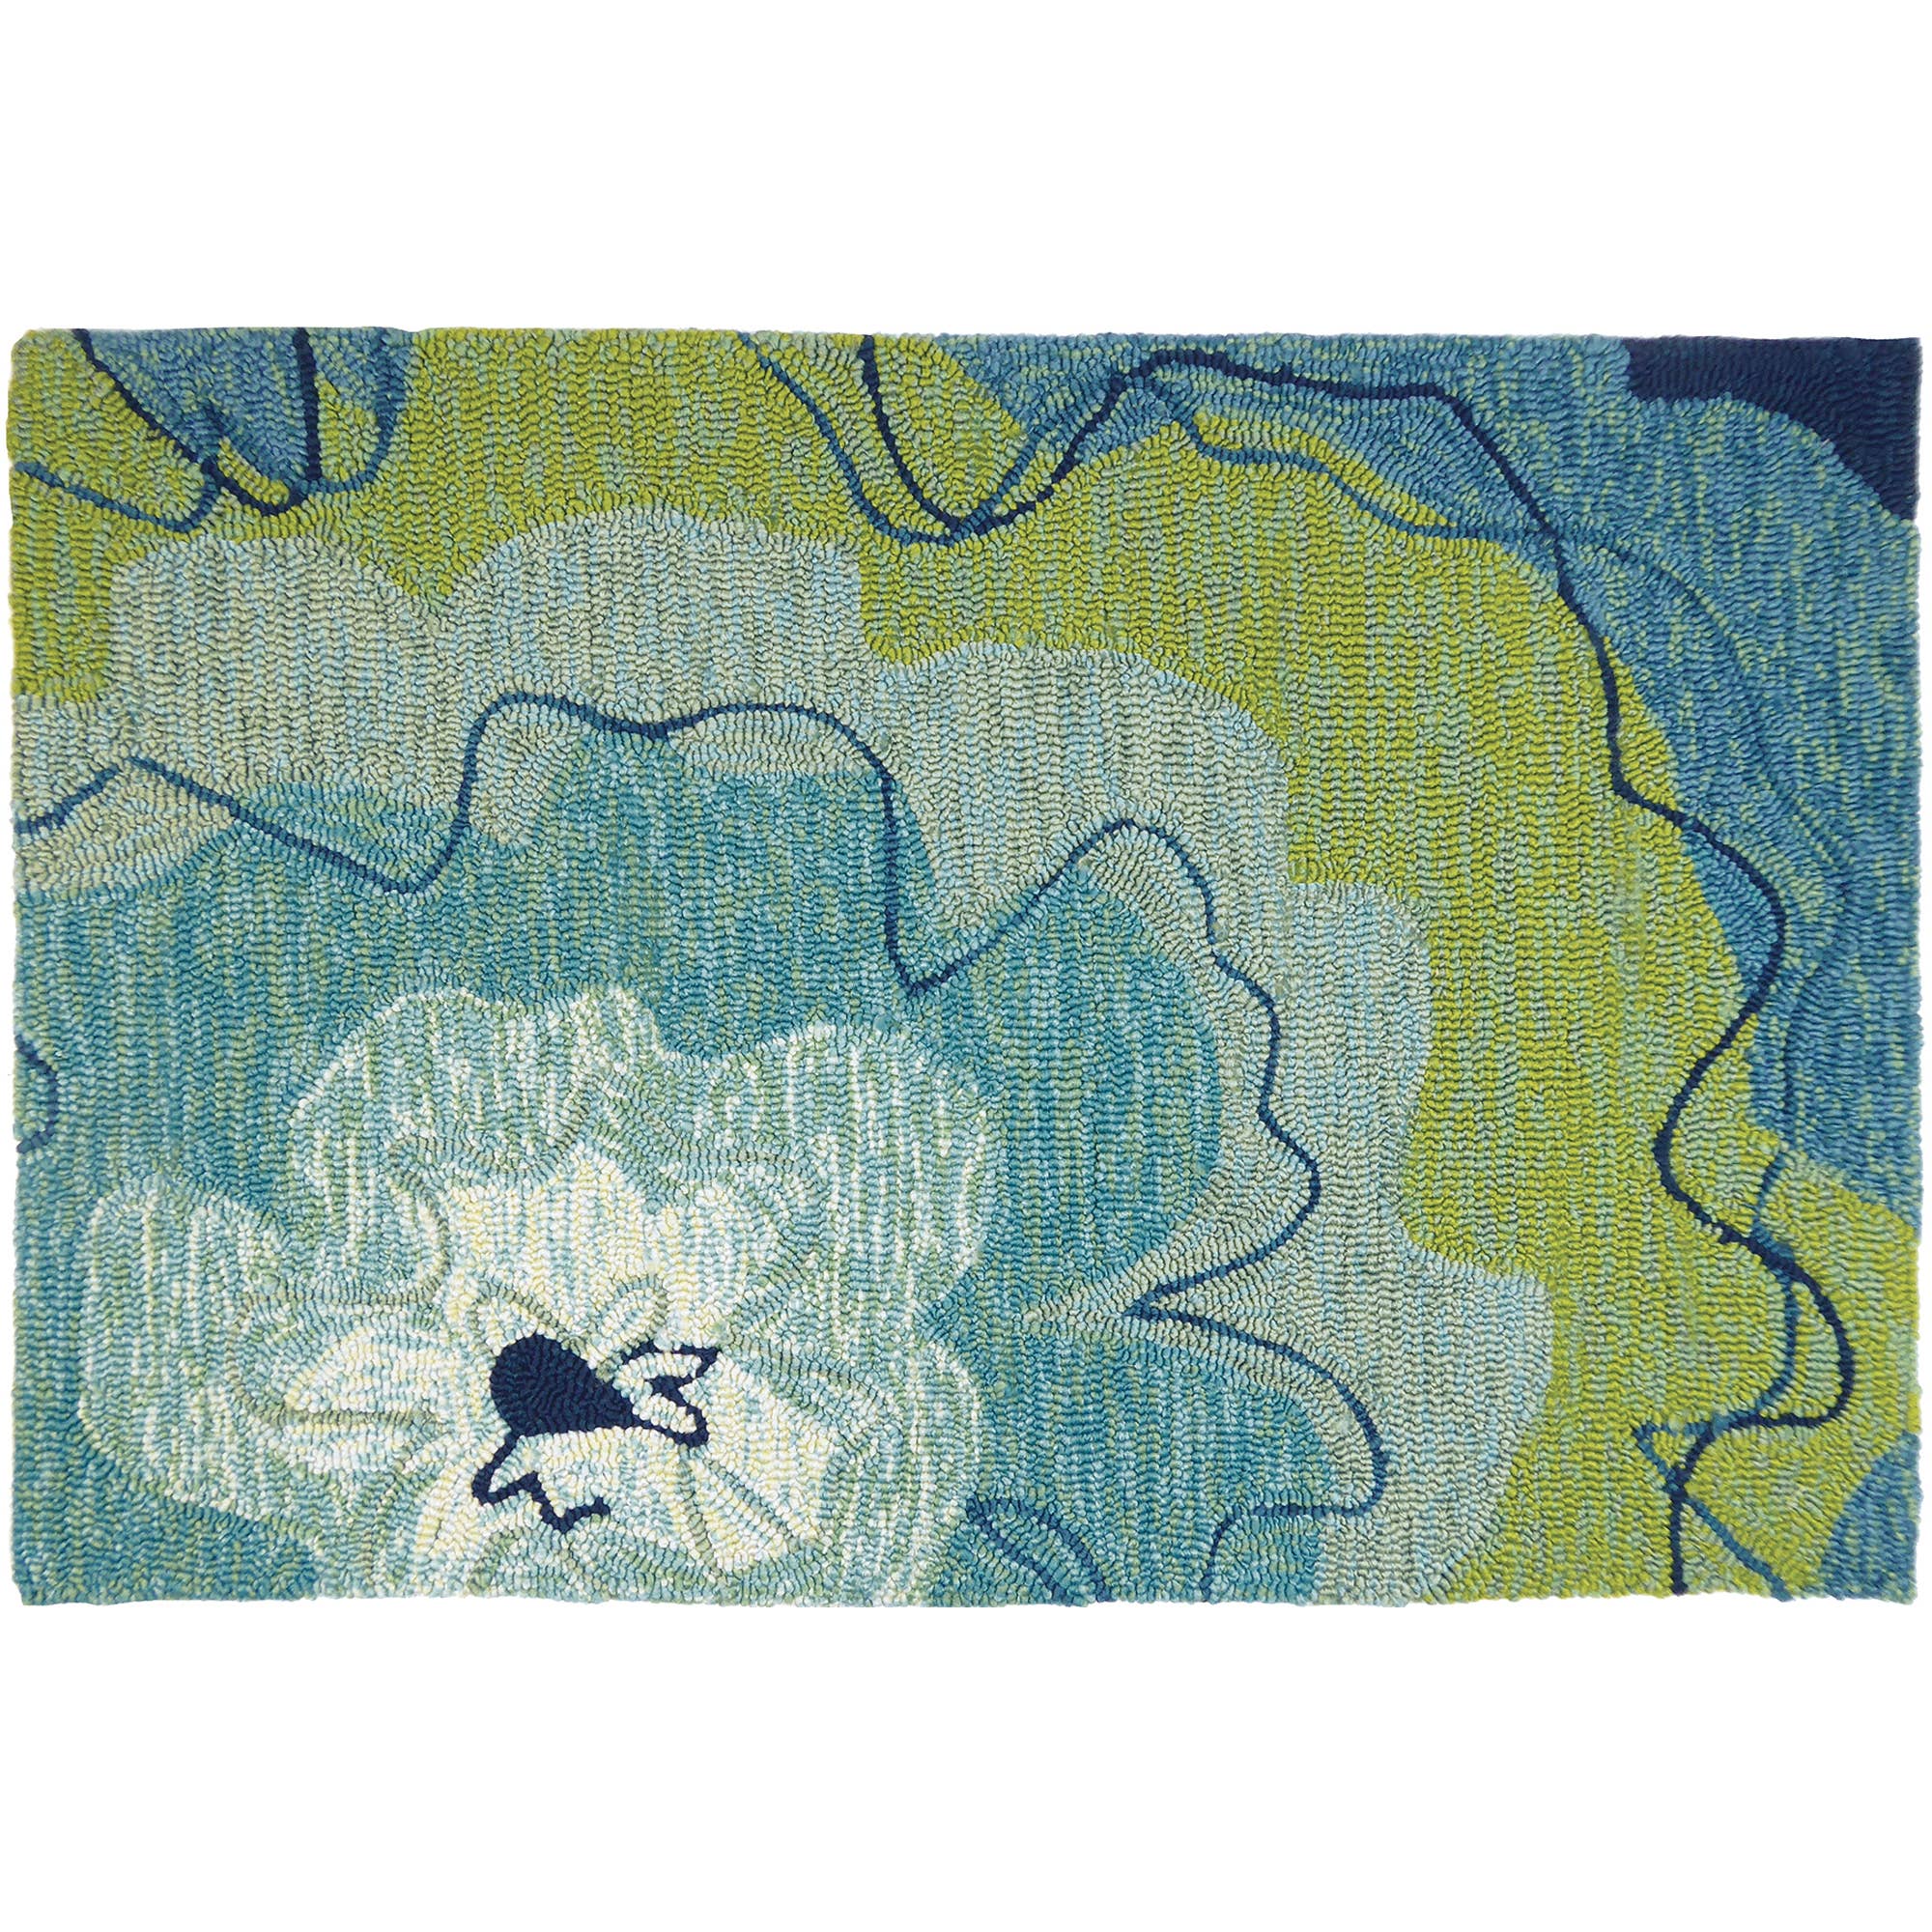 Jellybean Rug - Watercolor Blue Blossom Homefires Rug 22 x 34 in